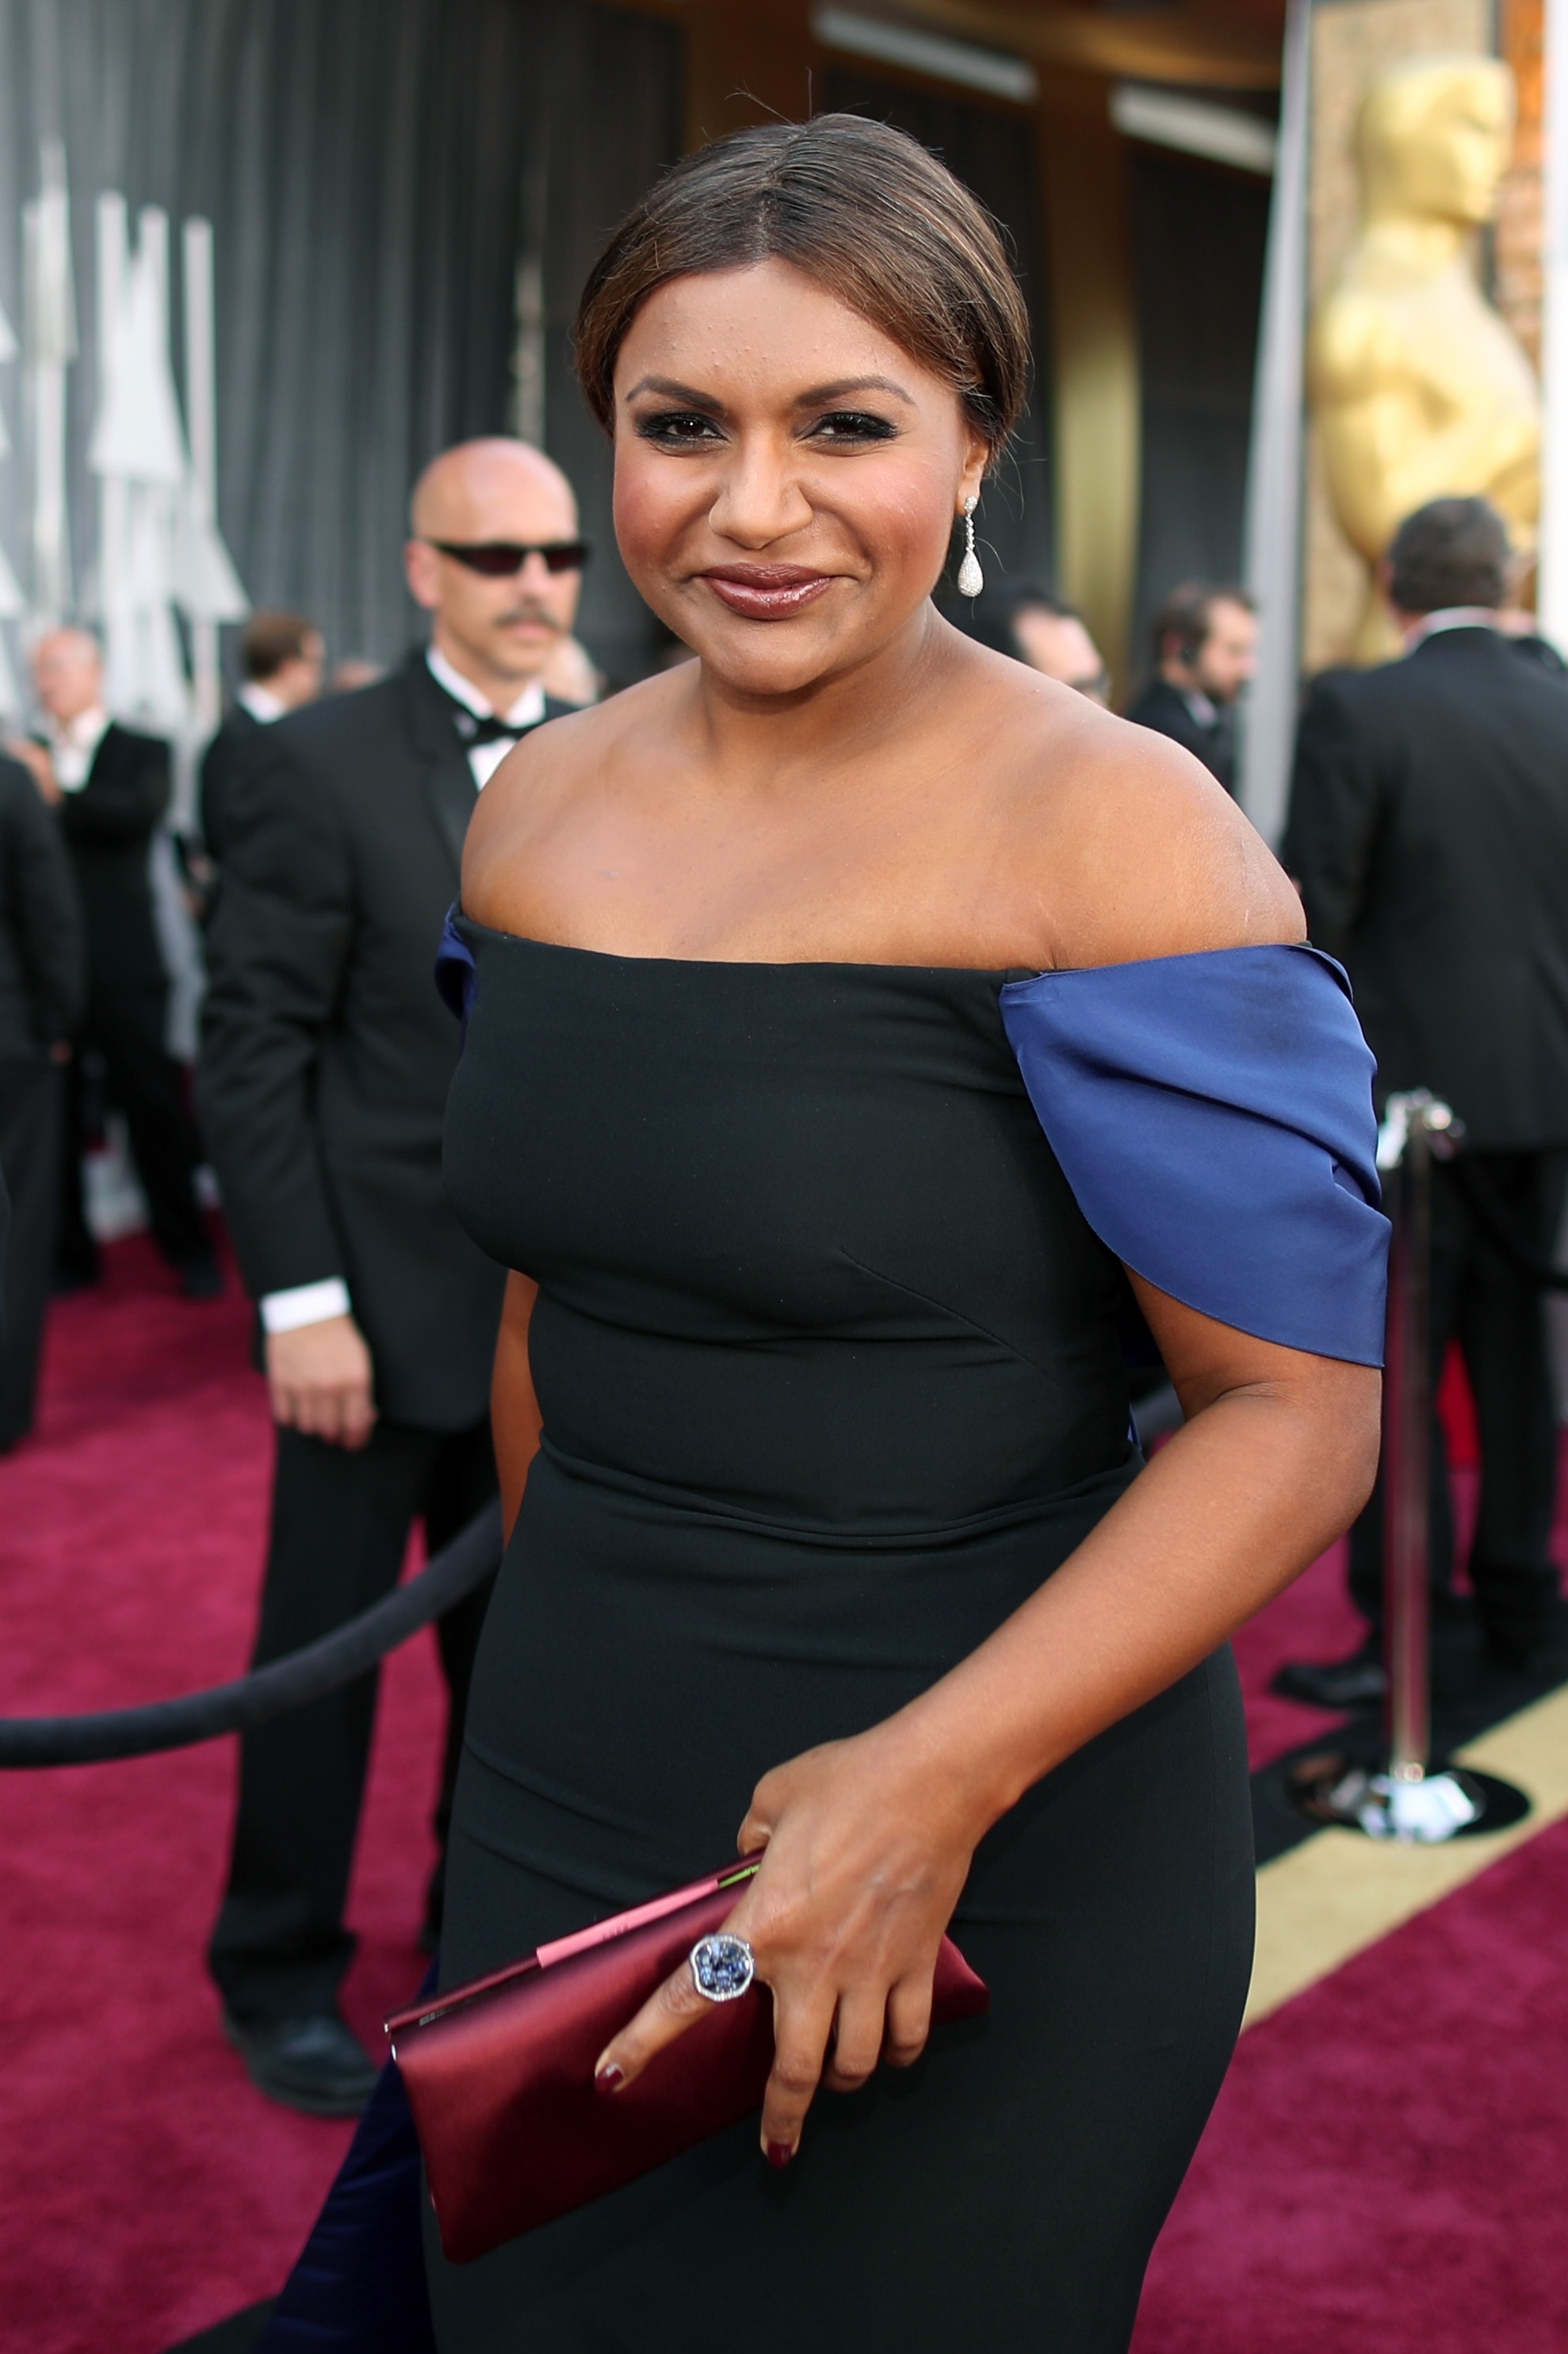 Mindy Kaling, pictured in 2016, smiles at the 88th Annual Academy Awards in Hollywood, California